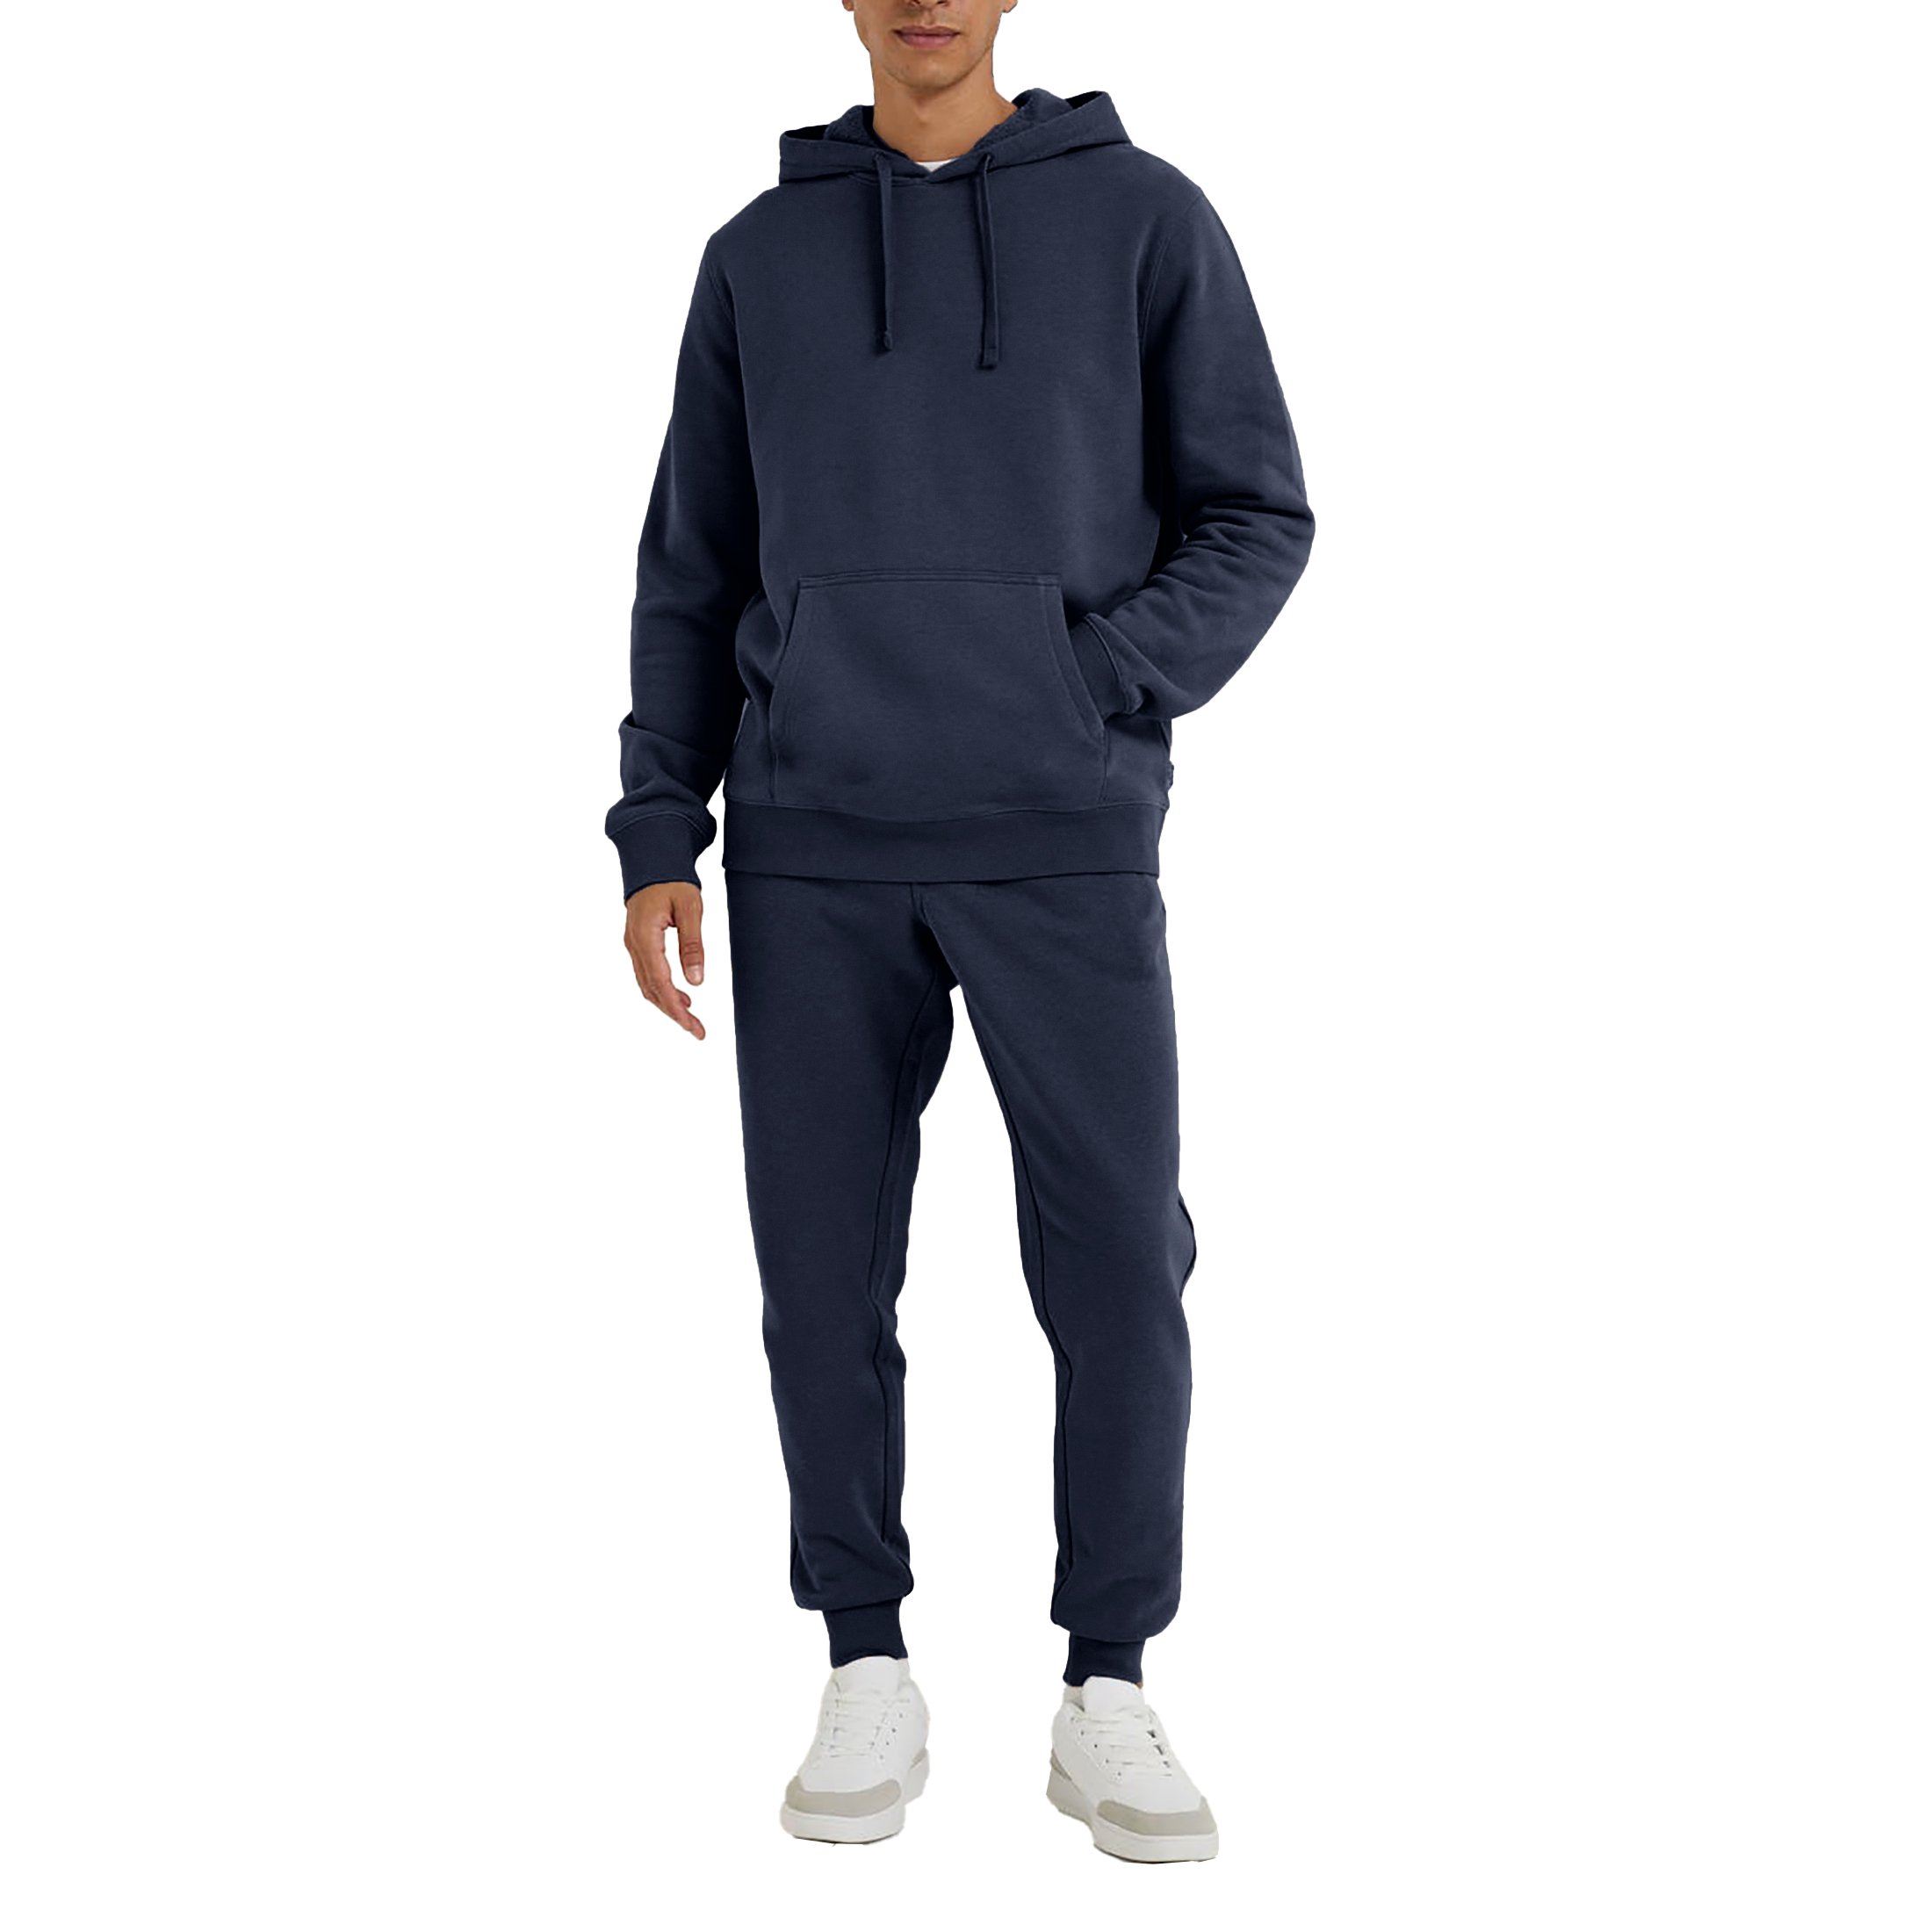 Men's Athletic Warm Jogging Pullover Active Tracksuit - Navy, 4X-Large